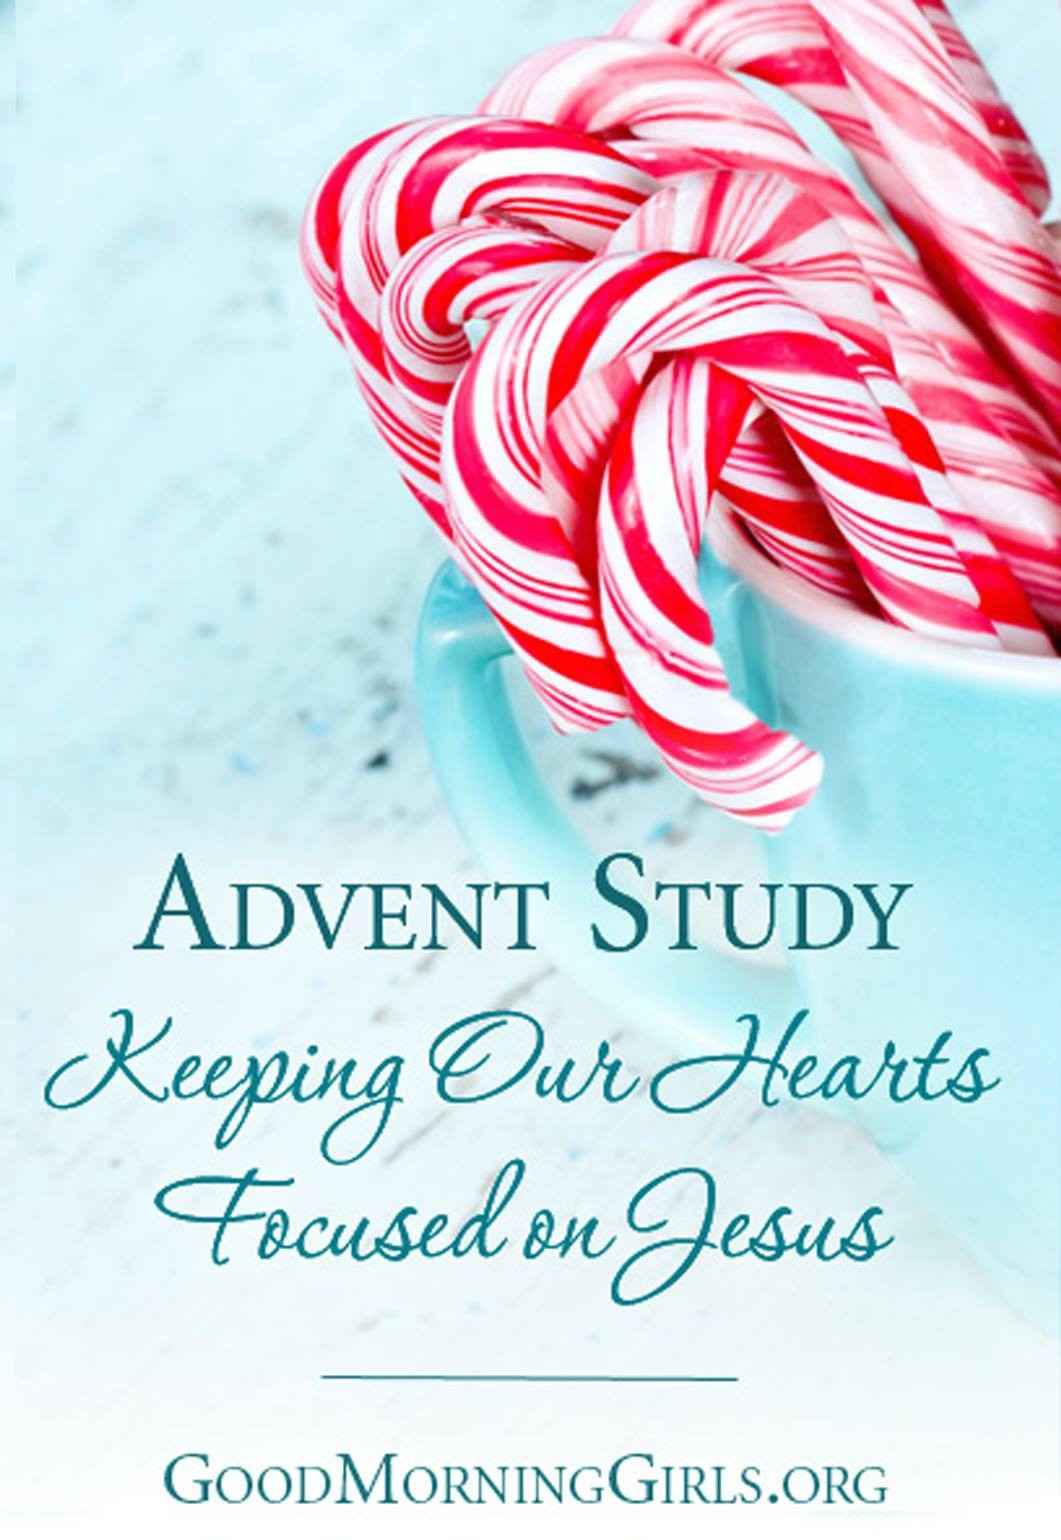 Free Advent Study {With Children's Resources} & A Journal to Quiet Our Hearts for the Holidays - Women Living Well